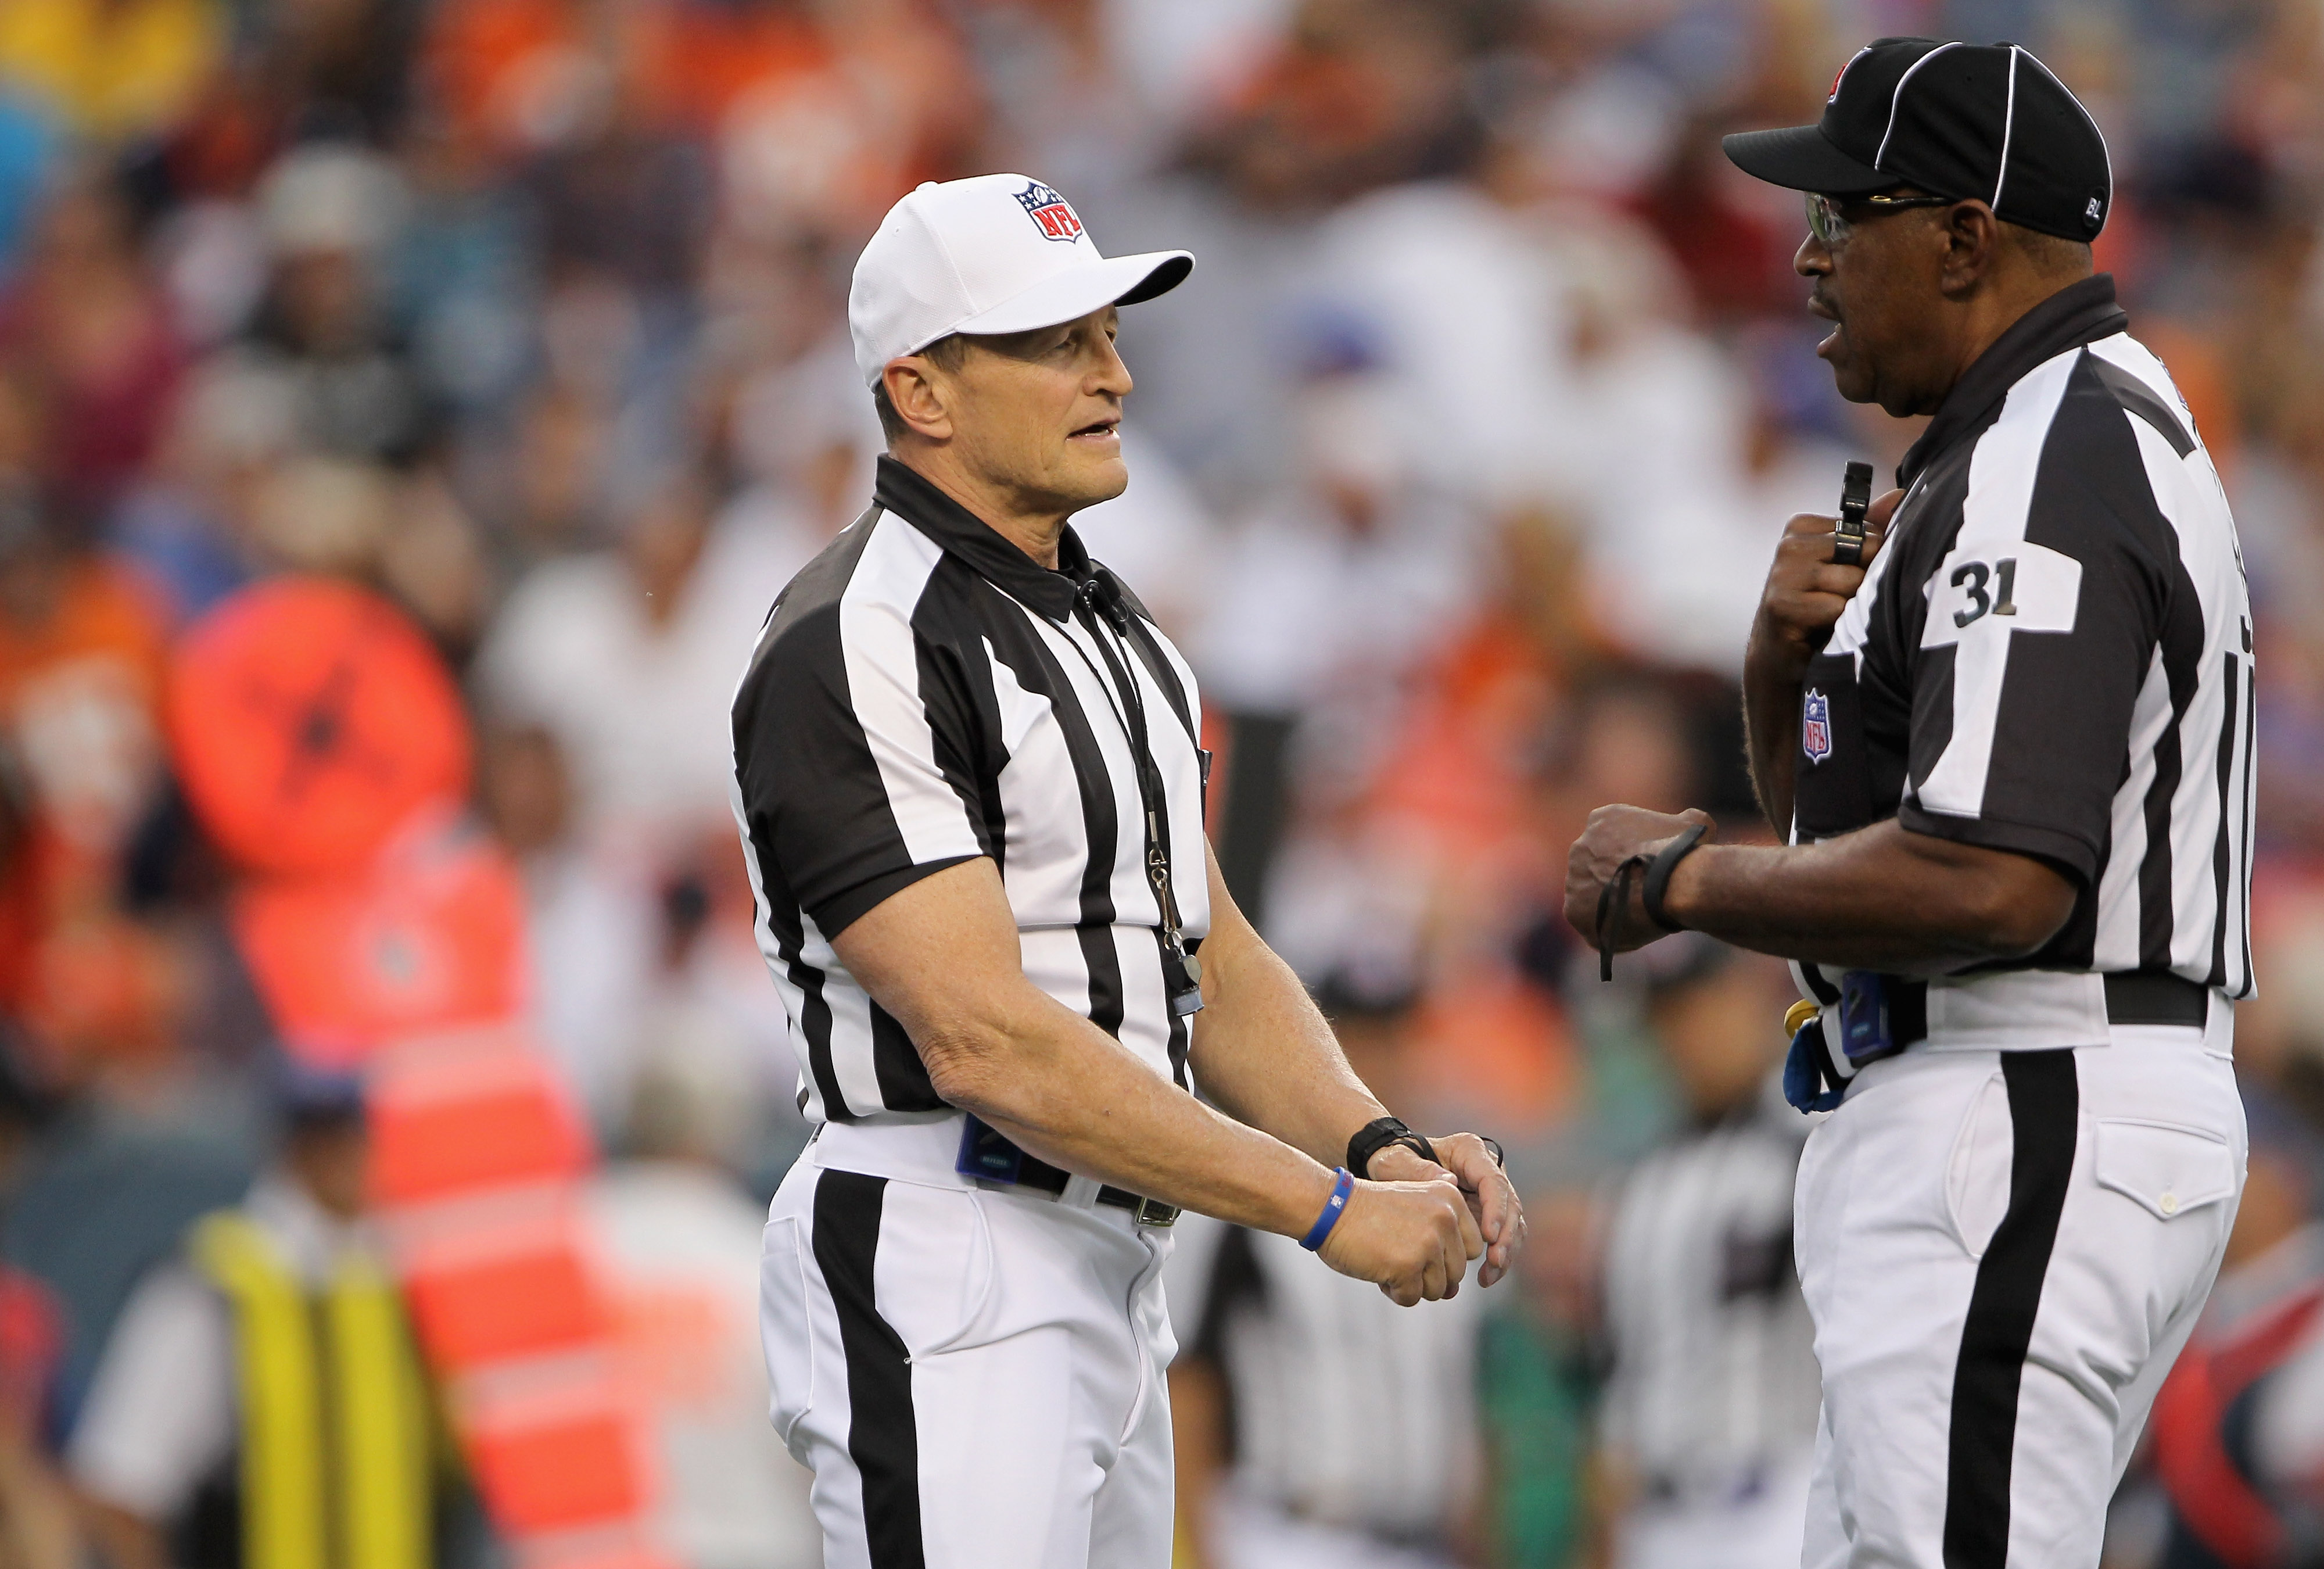 DENVER - AUGUST 21:  (L-R) Referee Ed Hochuli talks with umpire Chad Brown as they oversee the action between the Denver Broncos and the Detroit Lions during preseason NFL action at INVESCO Field at Mile High on August 21, 2010 in Denver, Colorado. The Li